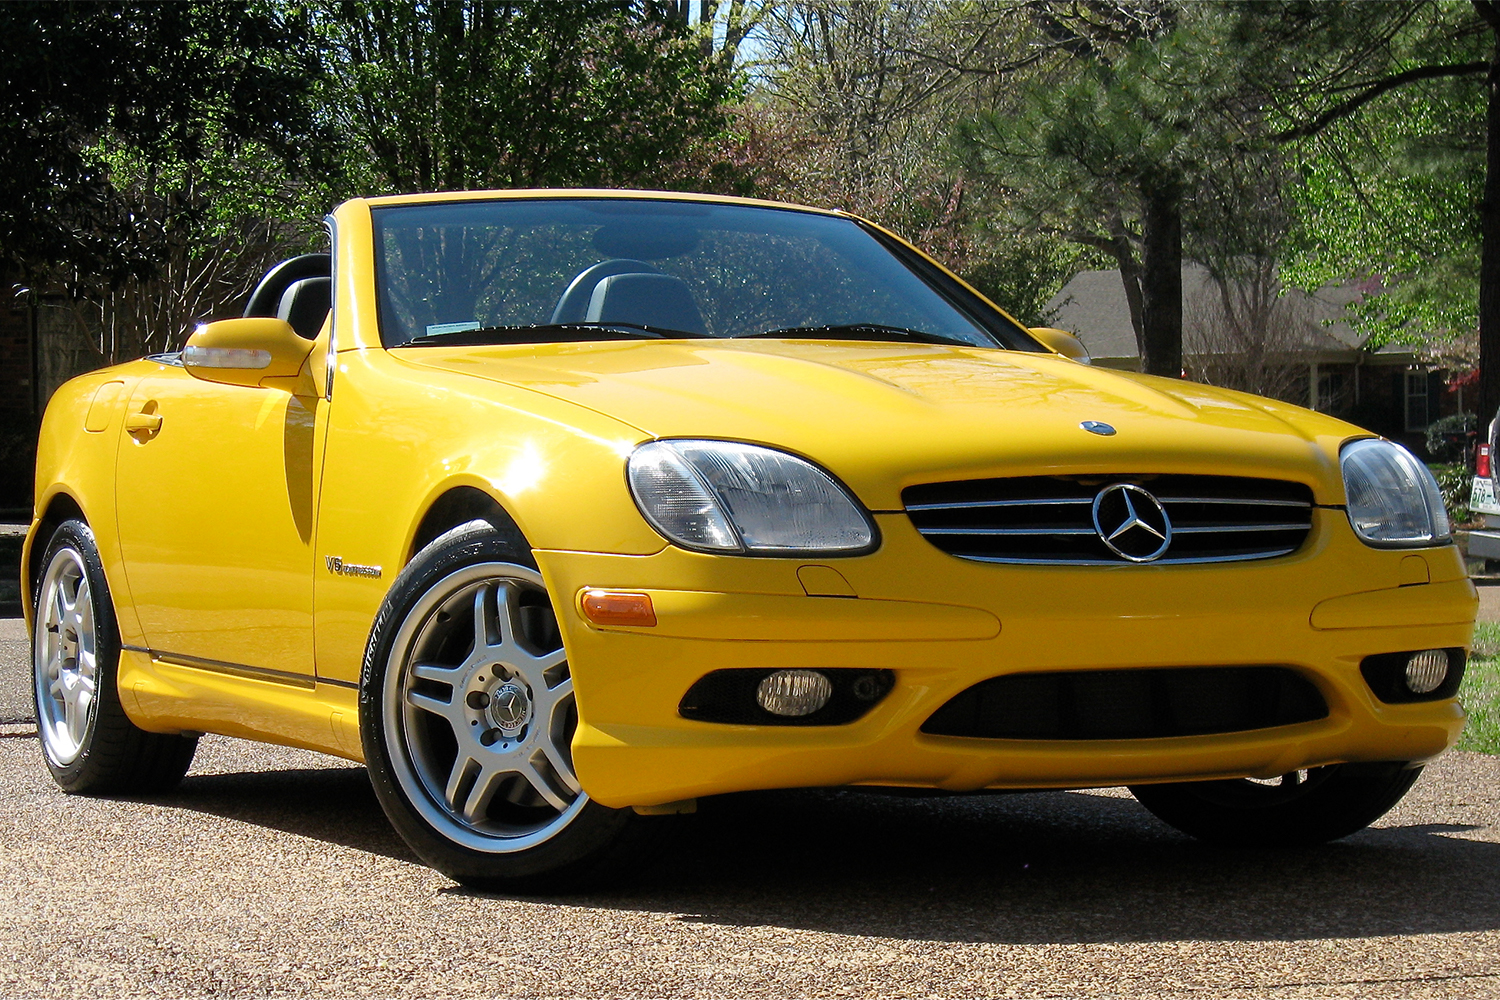 A yellow Mercedes-Benz SLK 32 AMG sitting in a driveway. It's considered a modern classic car, but it shares a platform with something more interesting.